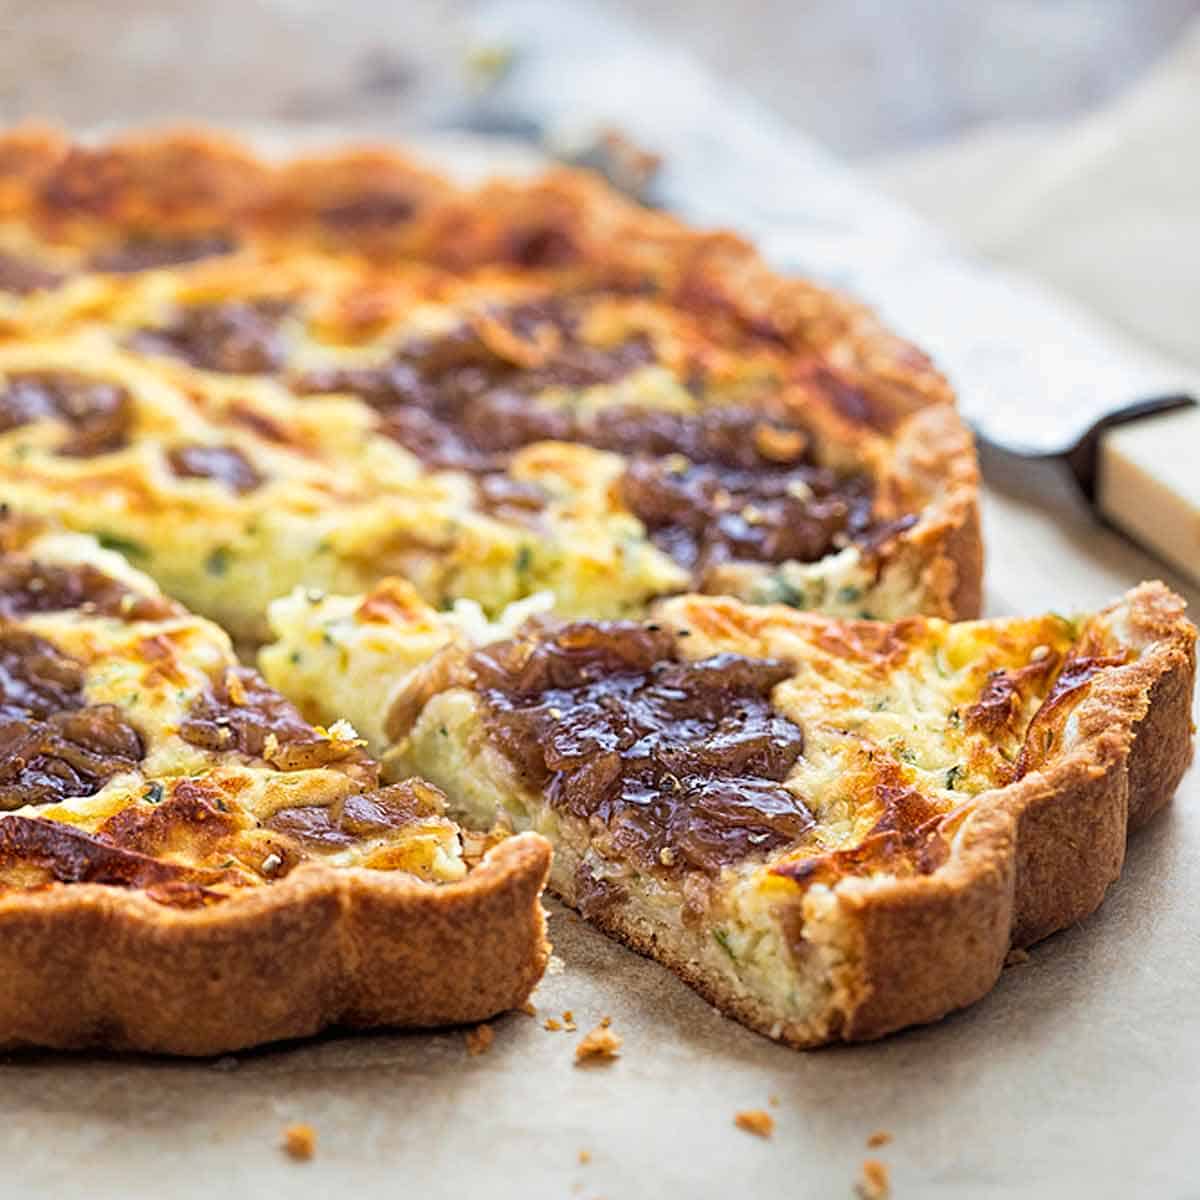 A quiche with dollops of bacon jam on the filling.